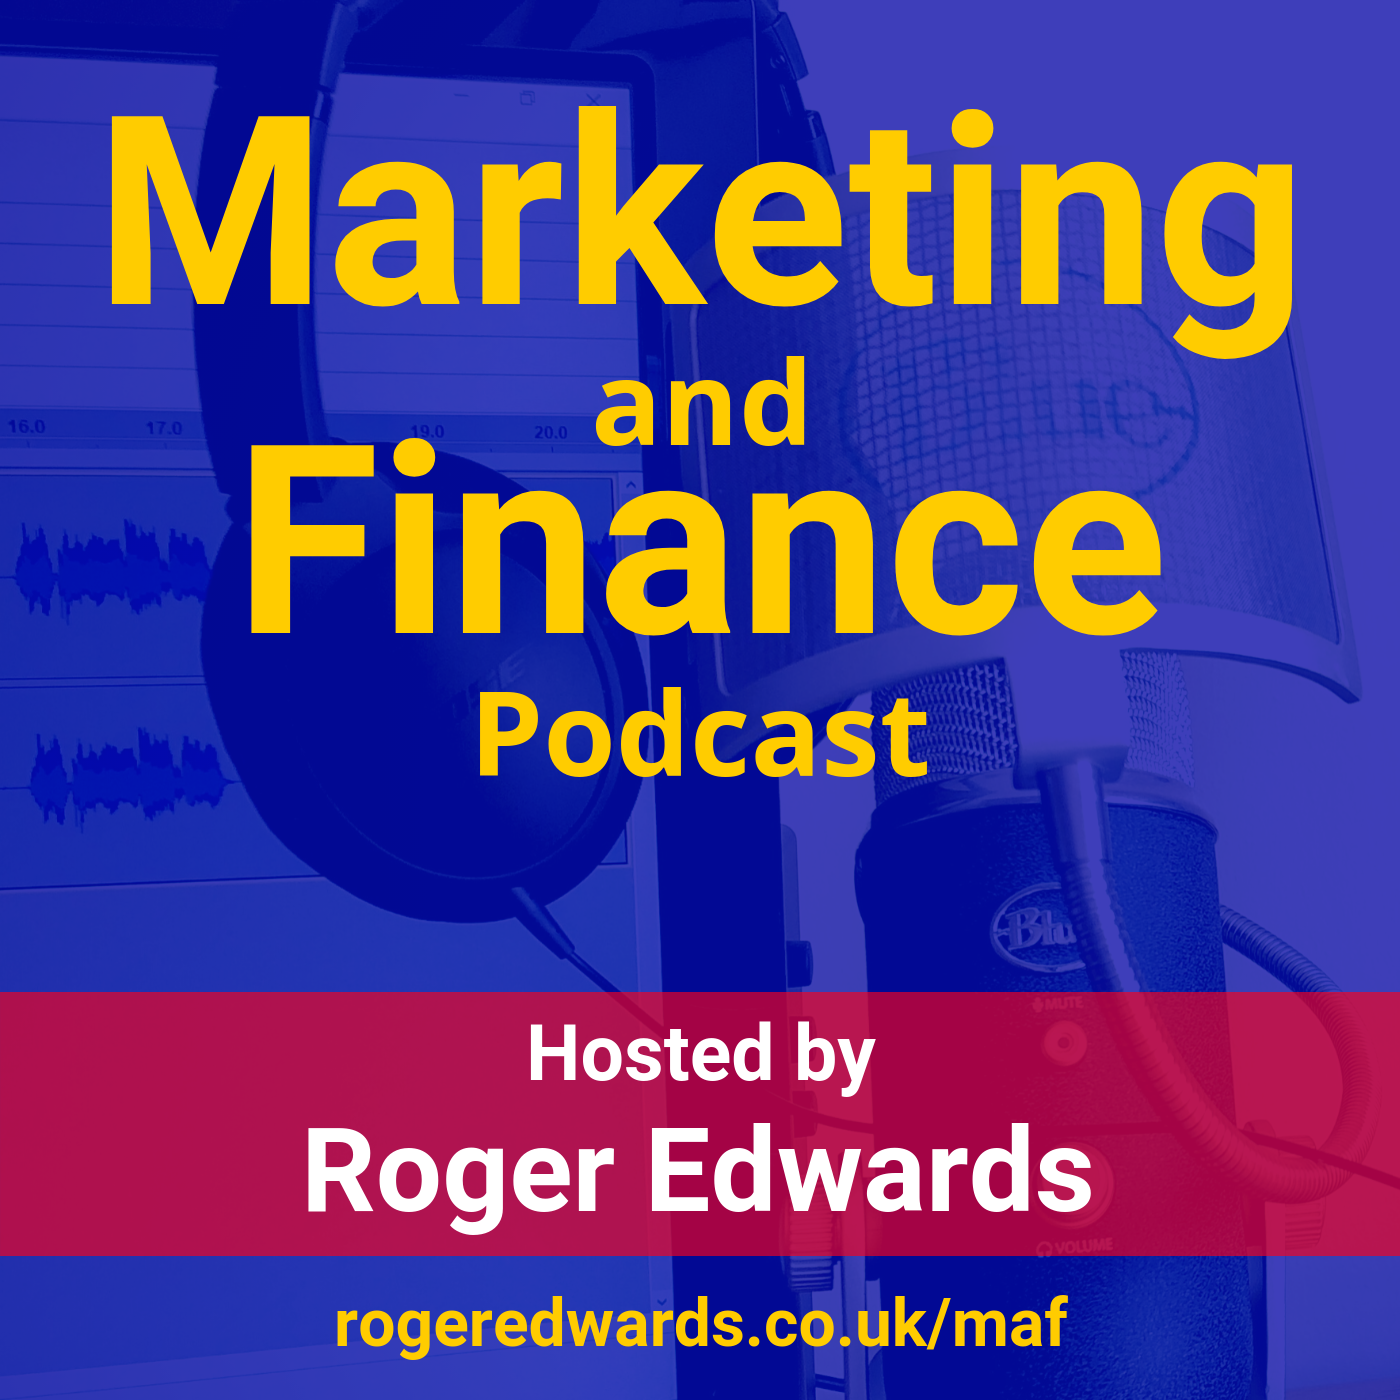 Marketing and Finance Podcast